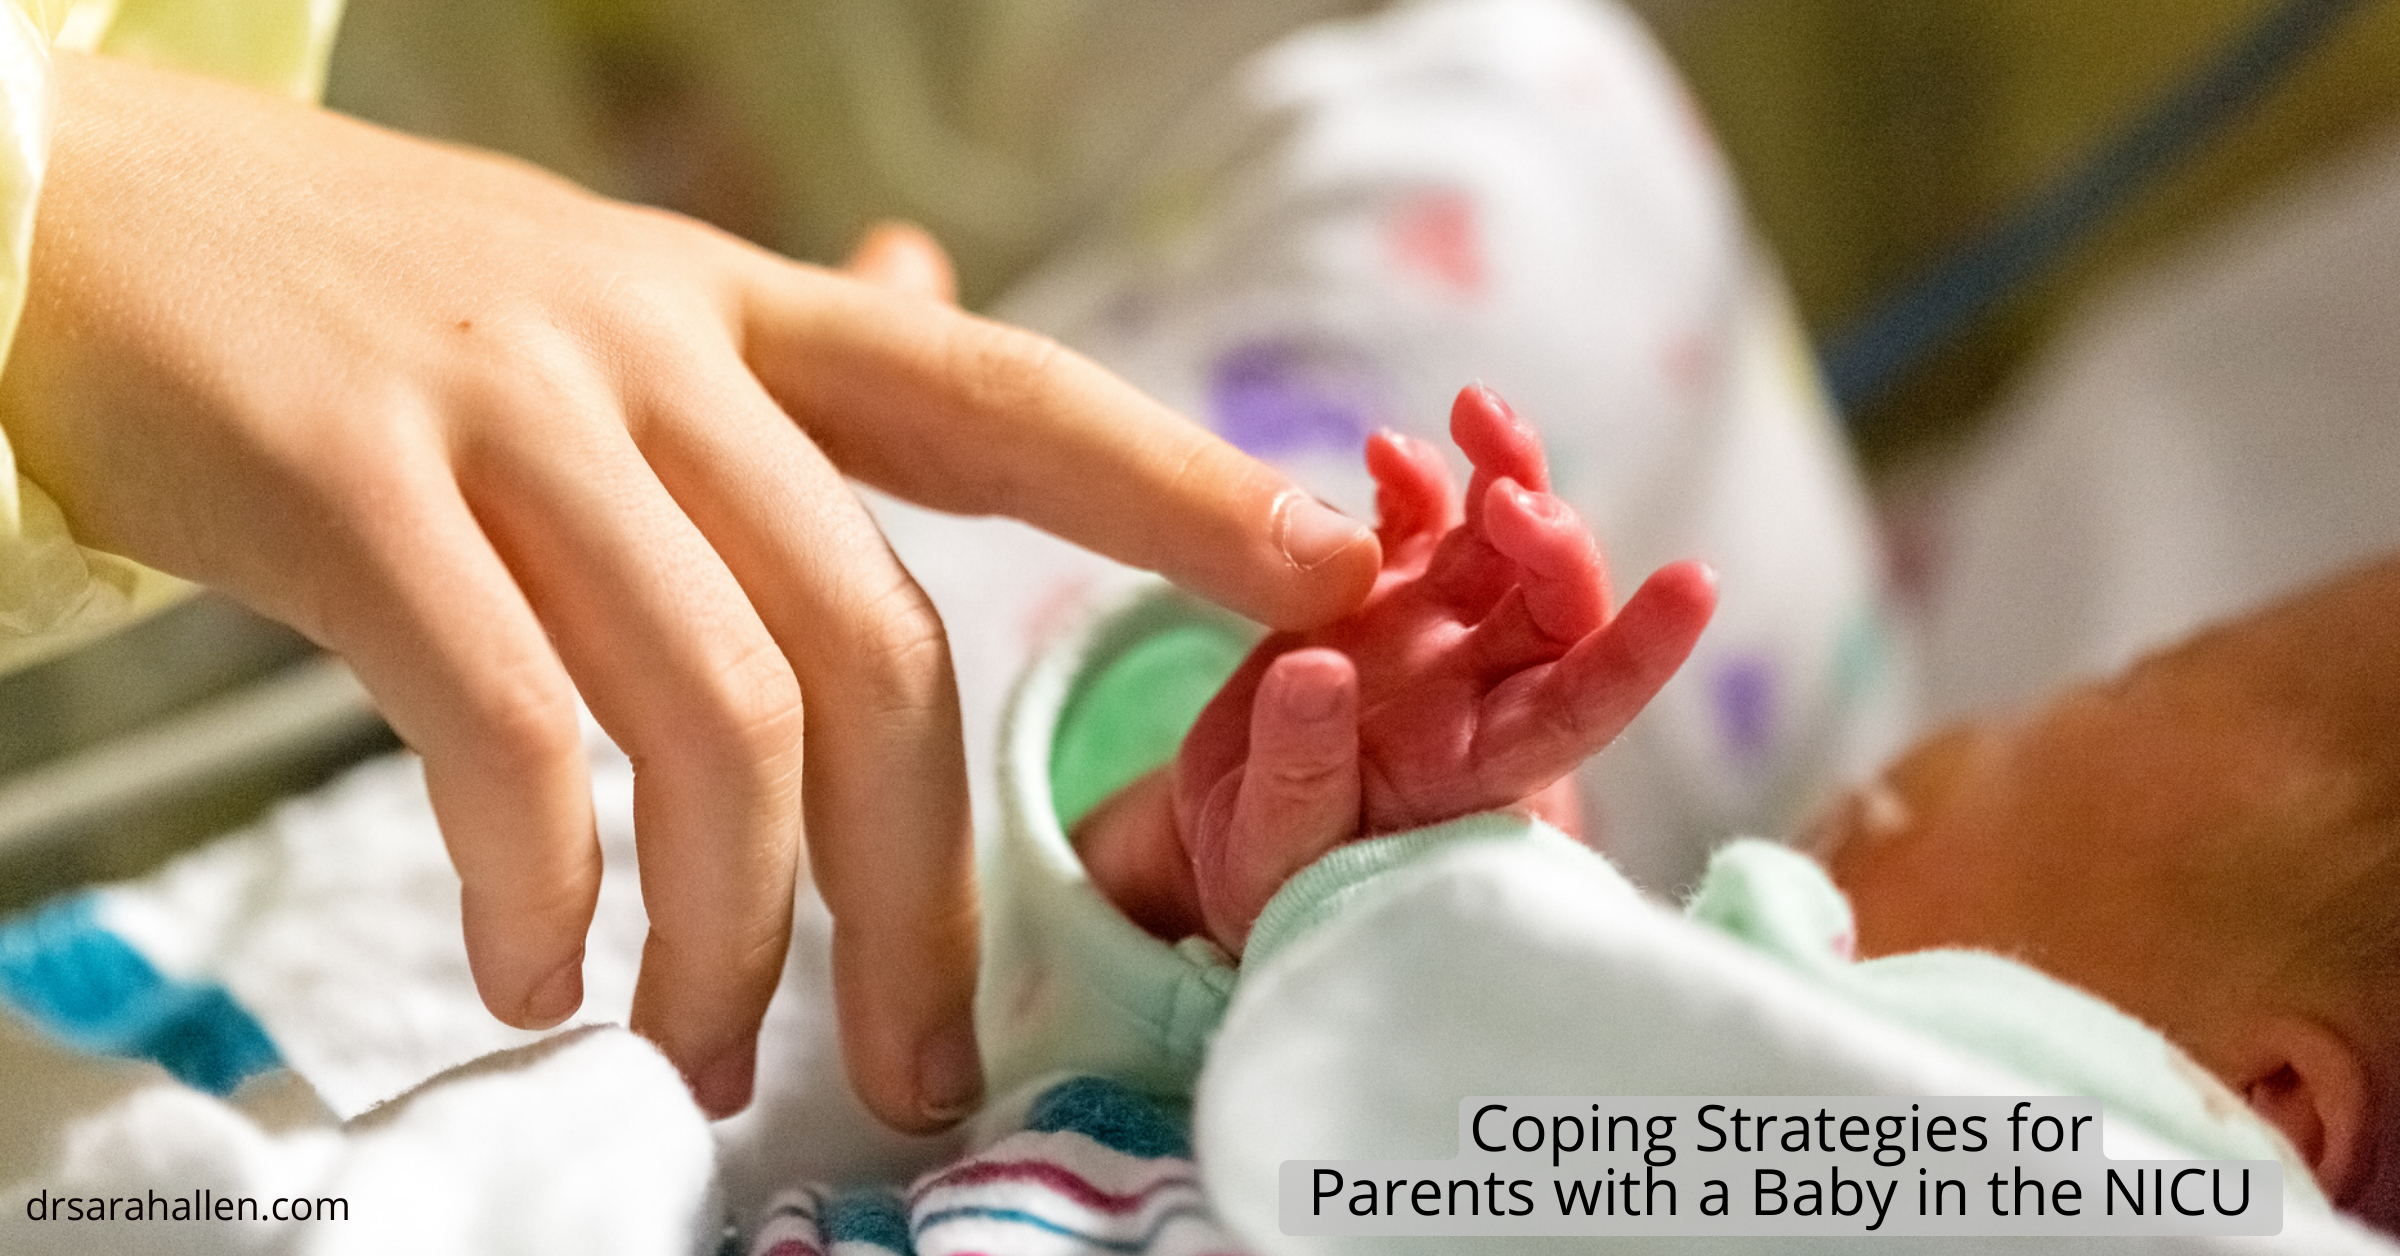 Coping strategies for parents with a baby in NICU